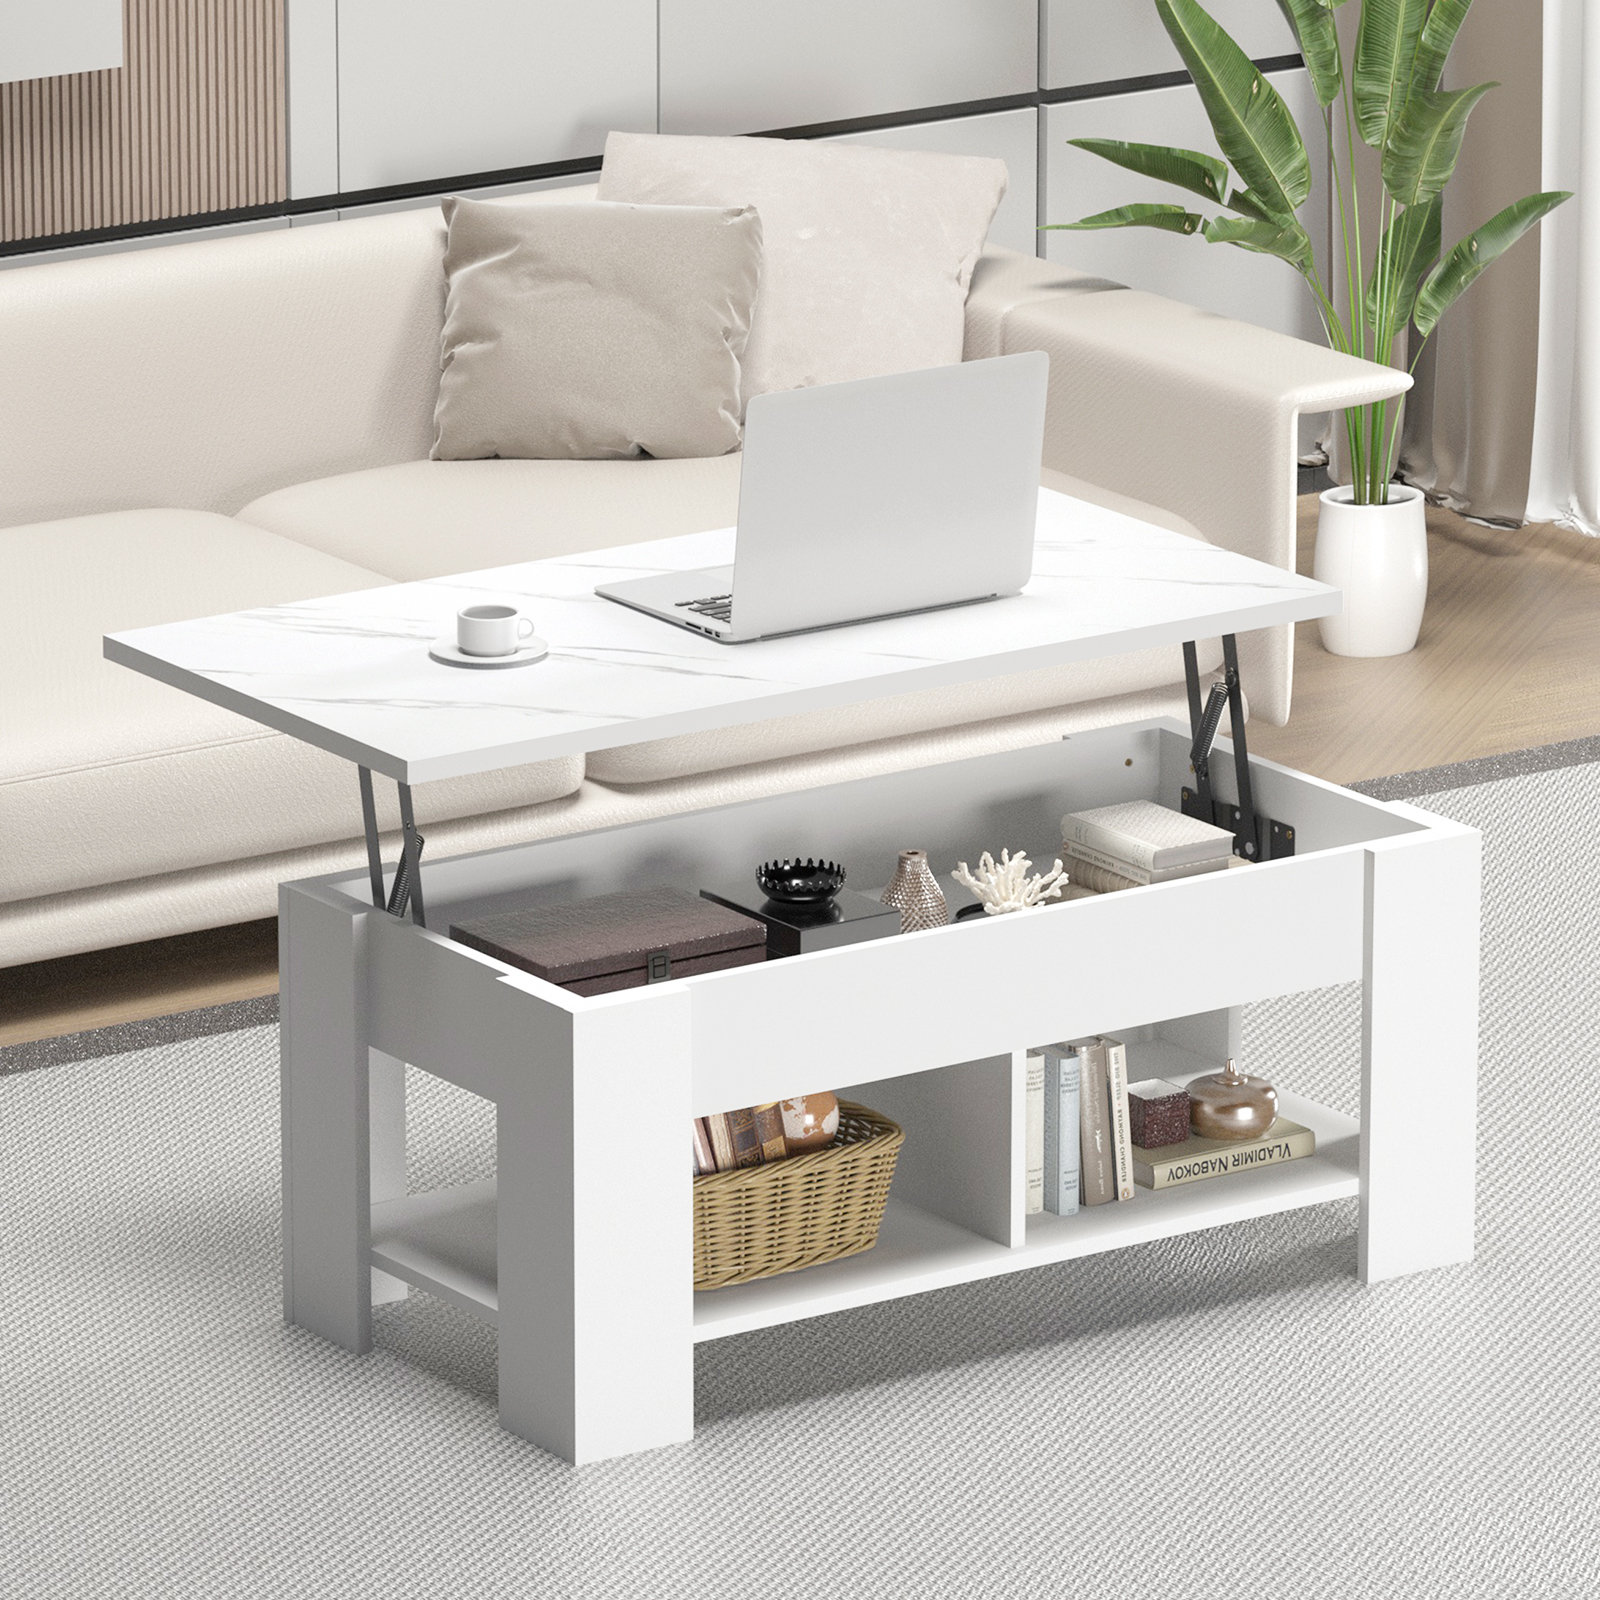 COCKTAIL TABLE Coffee Table with Storage 45.5*26*19H